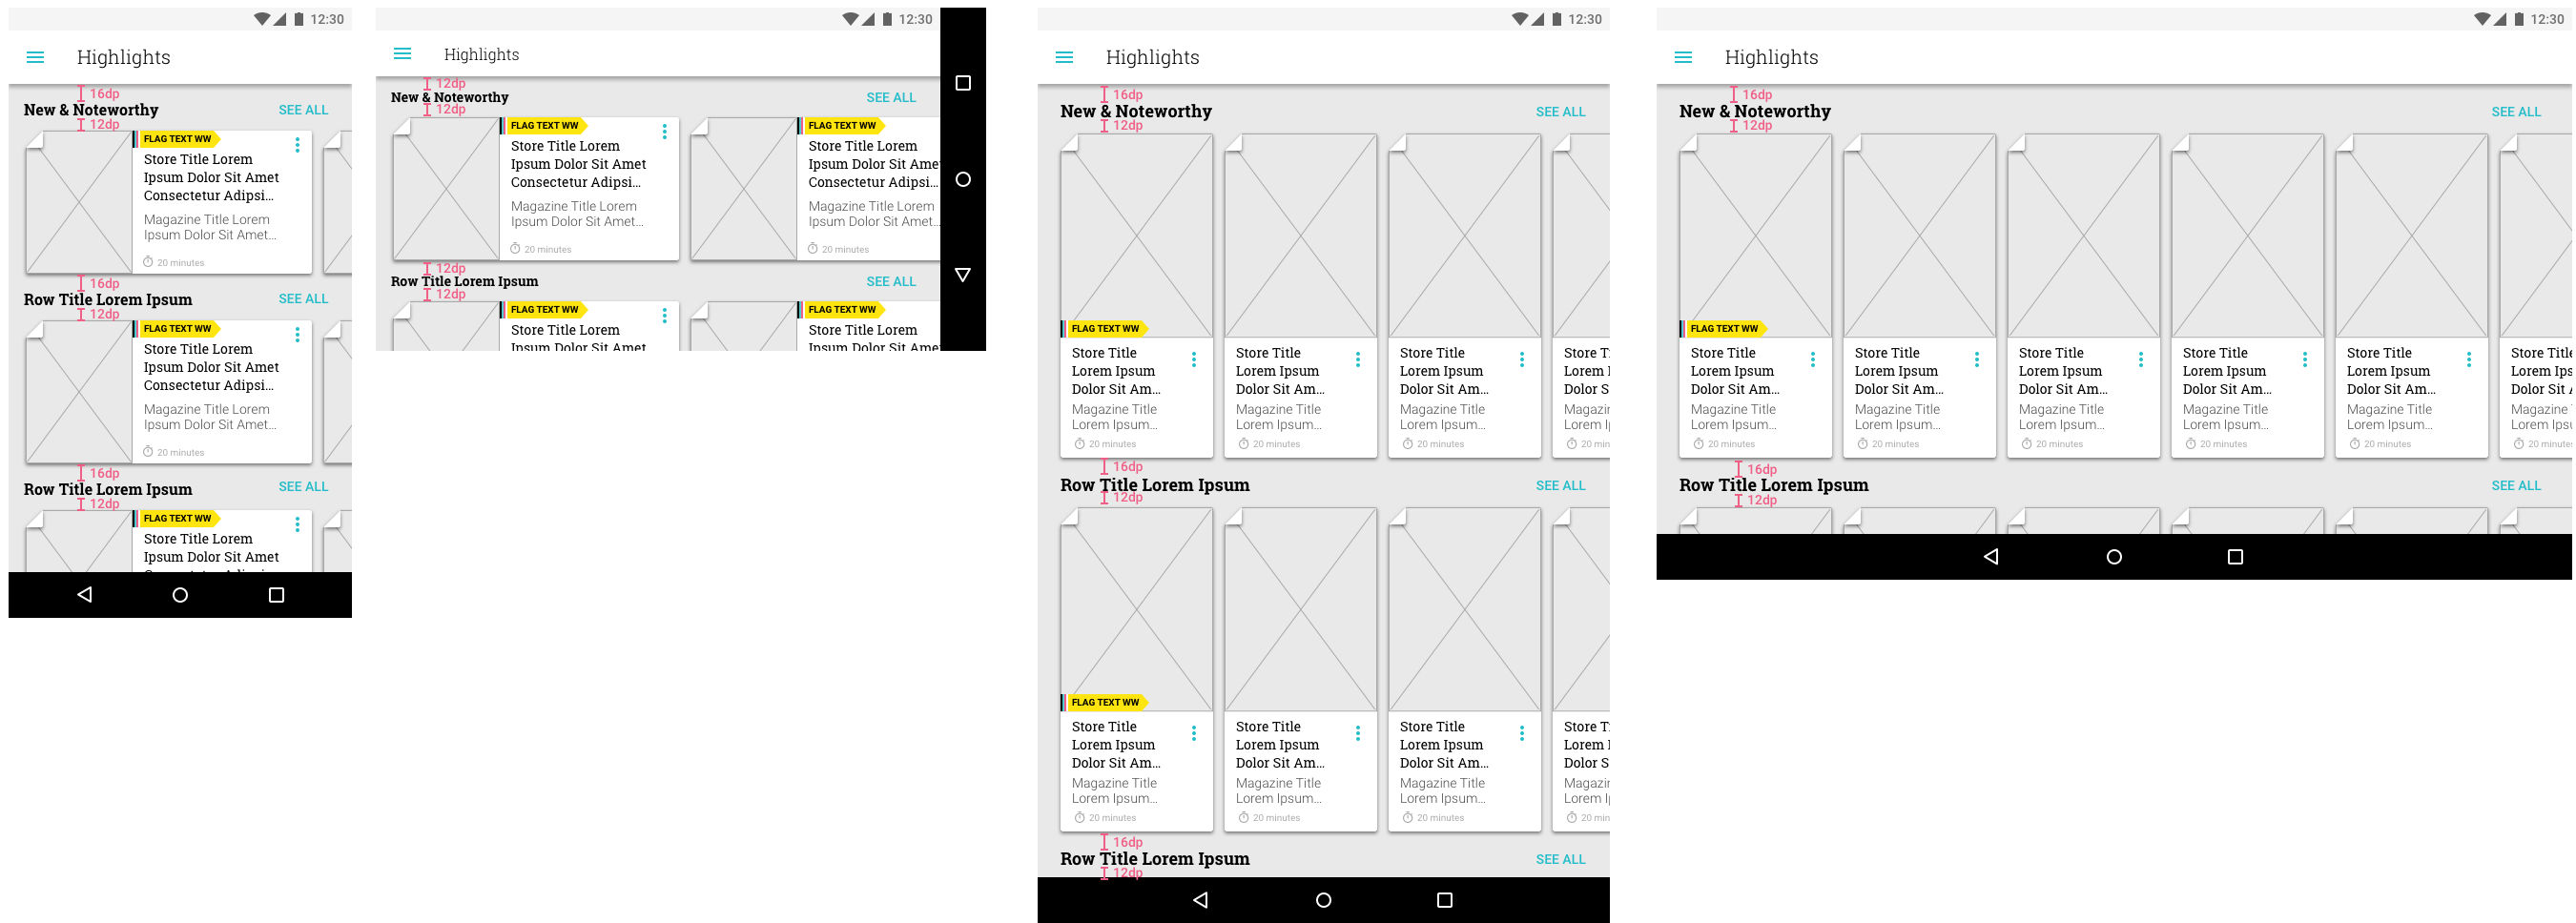 wireframes of Highlights with rows of scrollable carousels of news stories in 4 device layouts